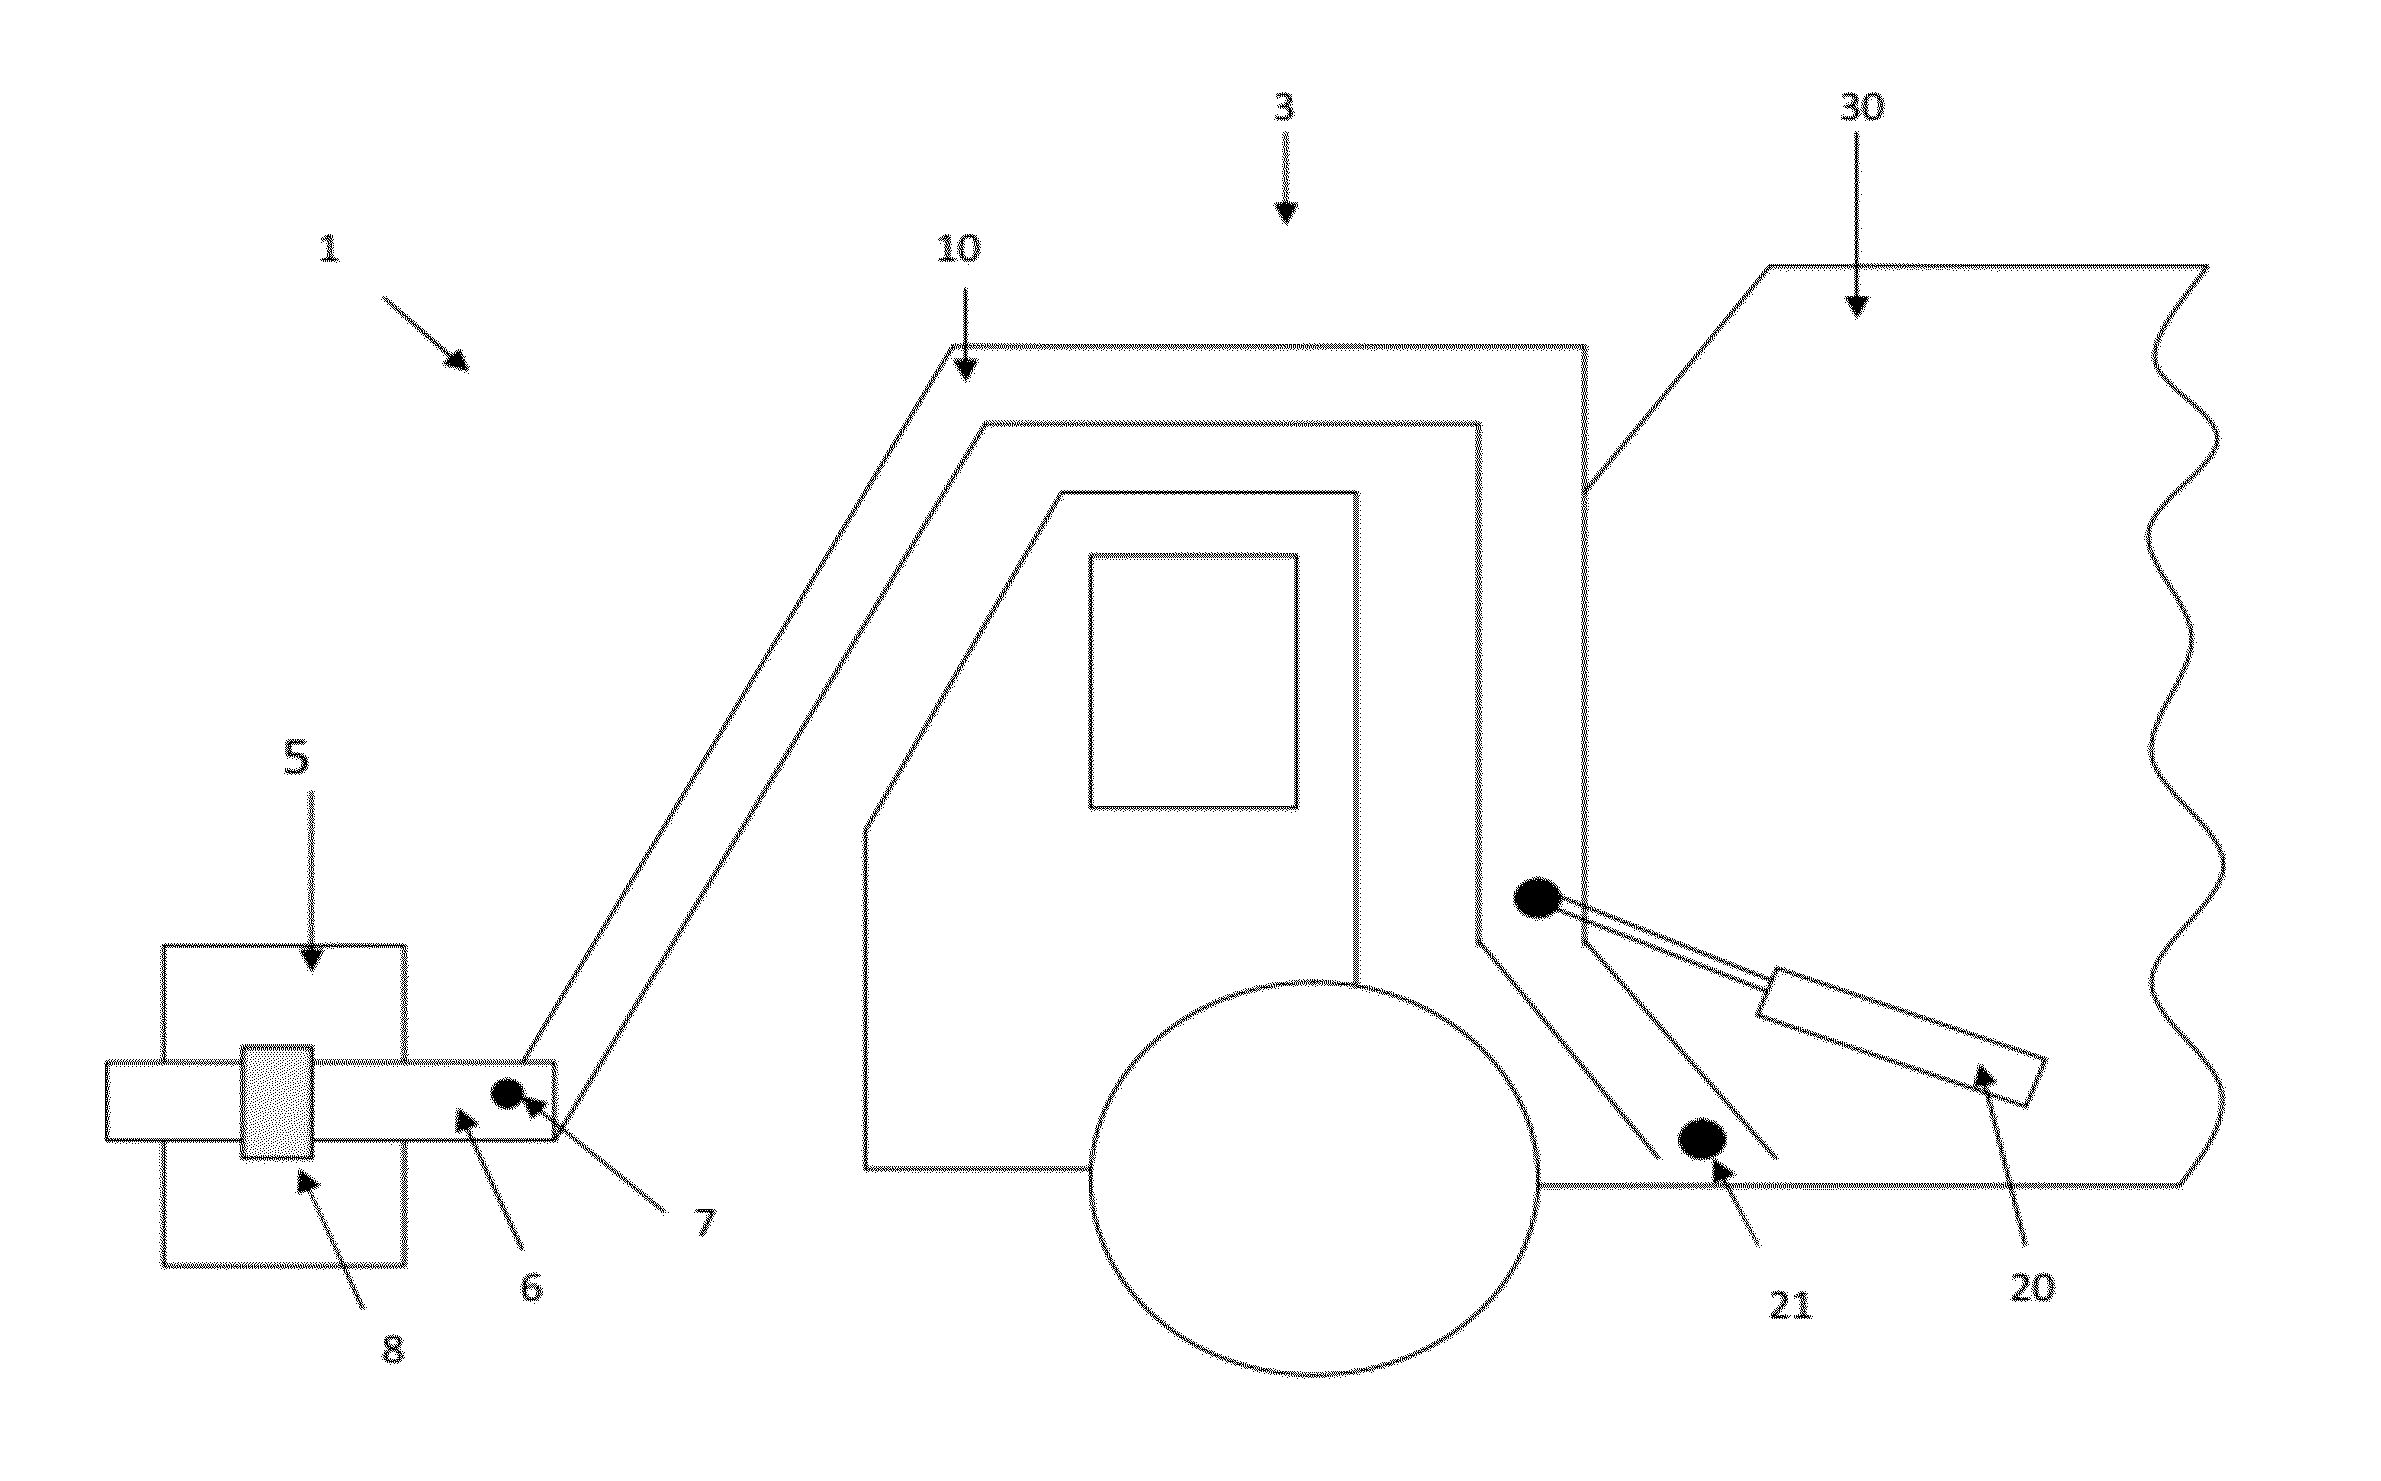 Weight measurement system for accurately determining the weight of material in a container being lifted